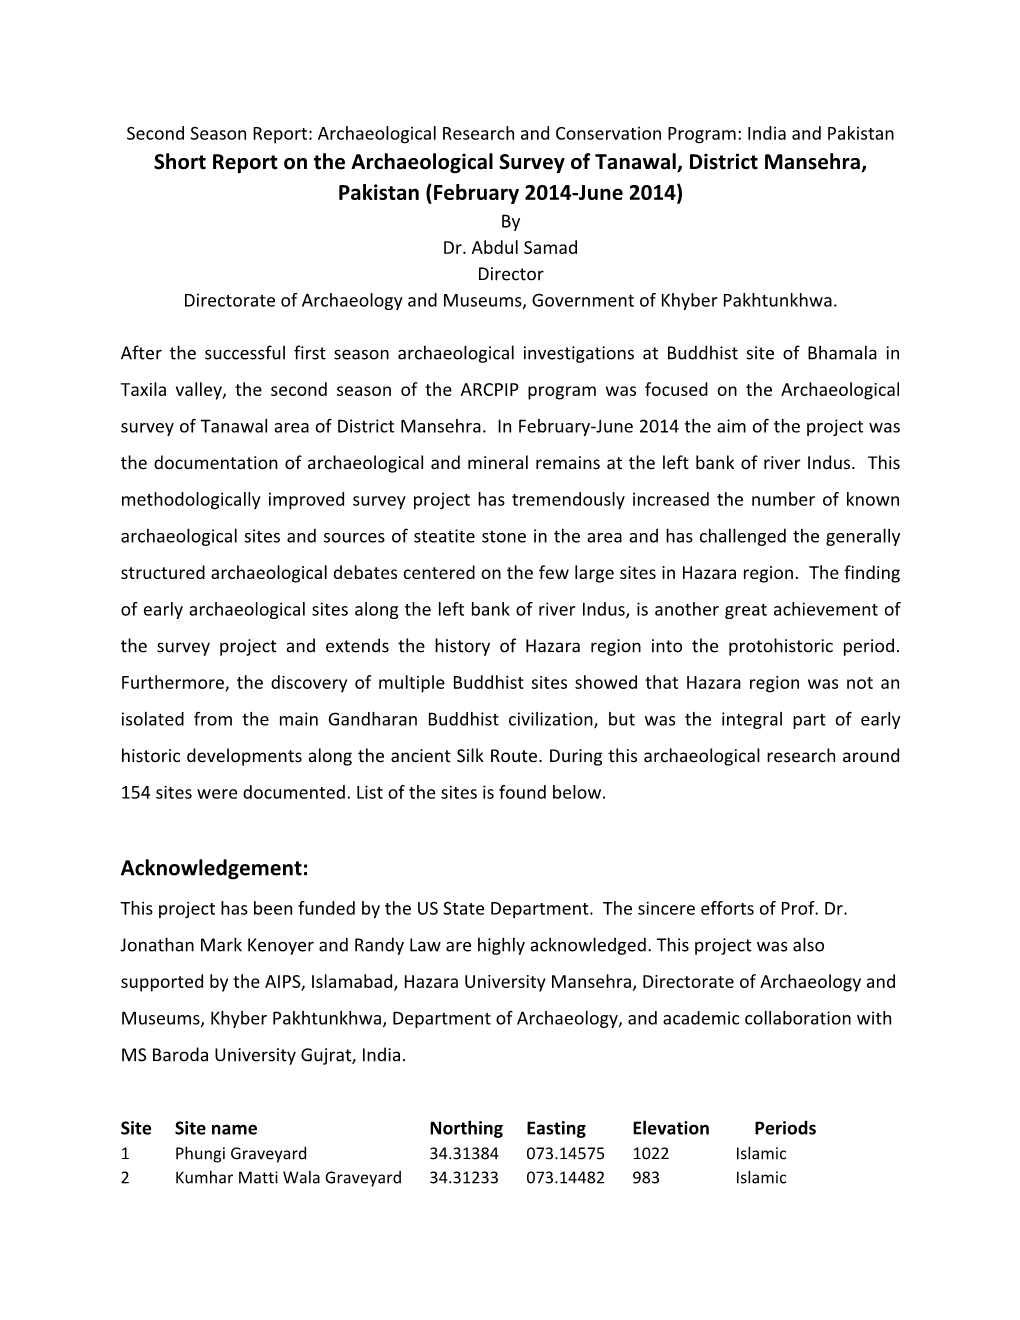 Short Report on the Archaeological Survey of Tanawal, District Mansehra, Pakistan (February 2014‐June 2014) by Dr